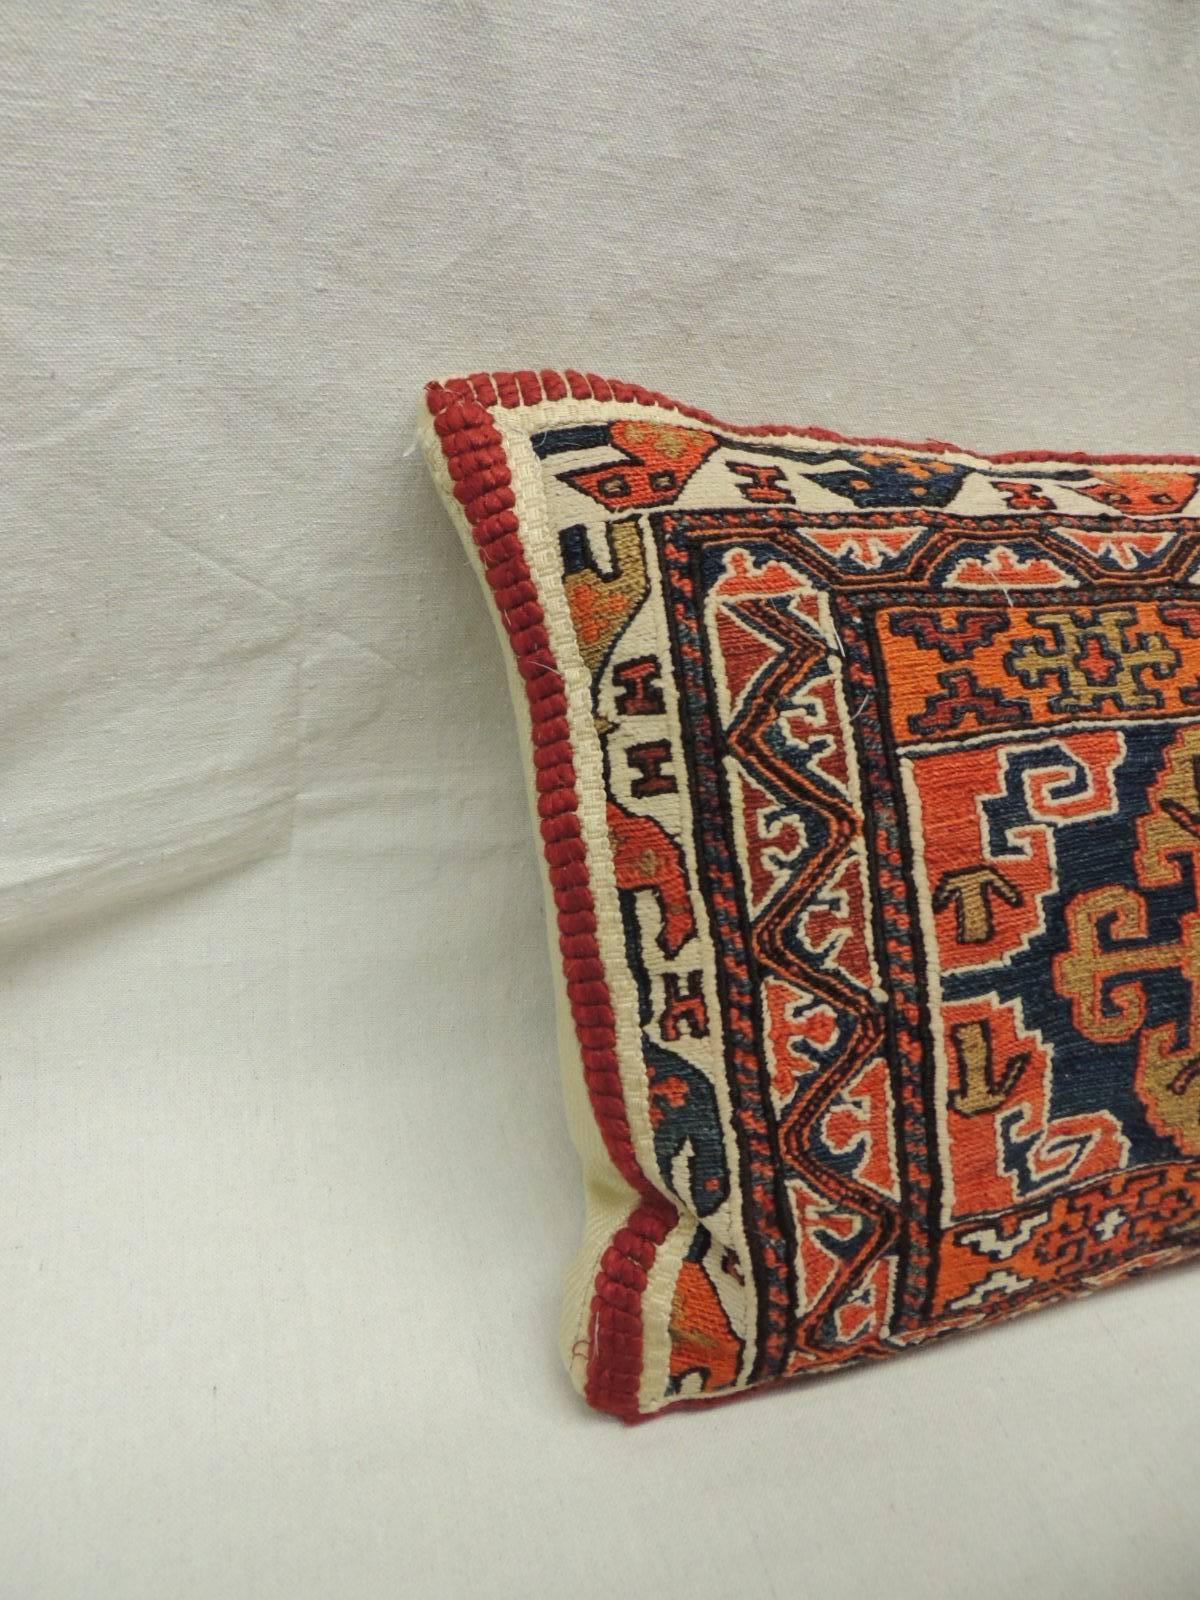 19th Century Uzbek Kilim large bolster pillow. Traditional tribal design in shades or orange, red, green, natural and blue. Framed with a linen and cotton red trim and natural linen backing.

